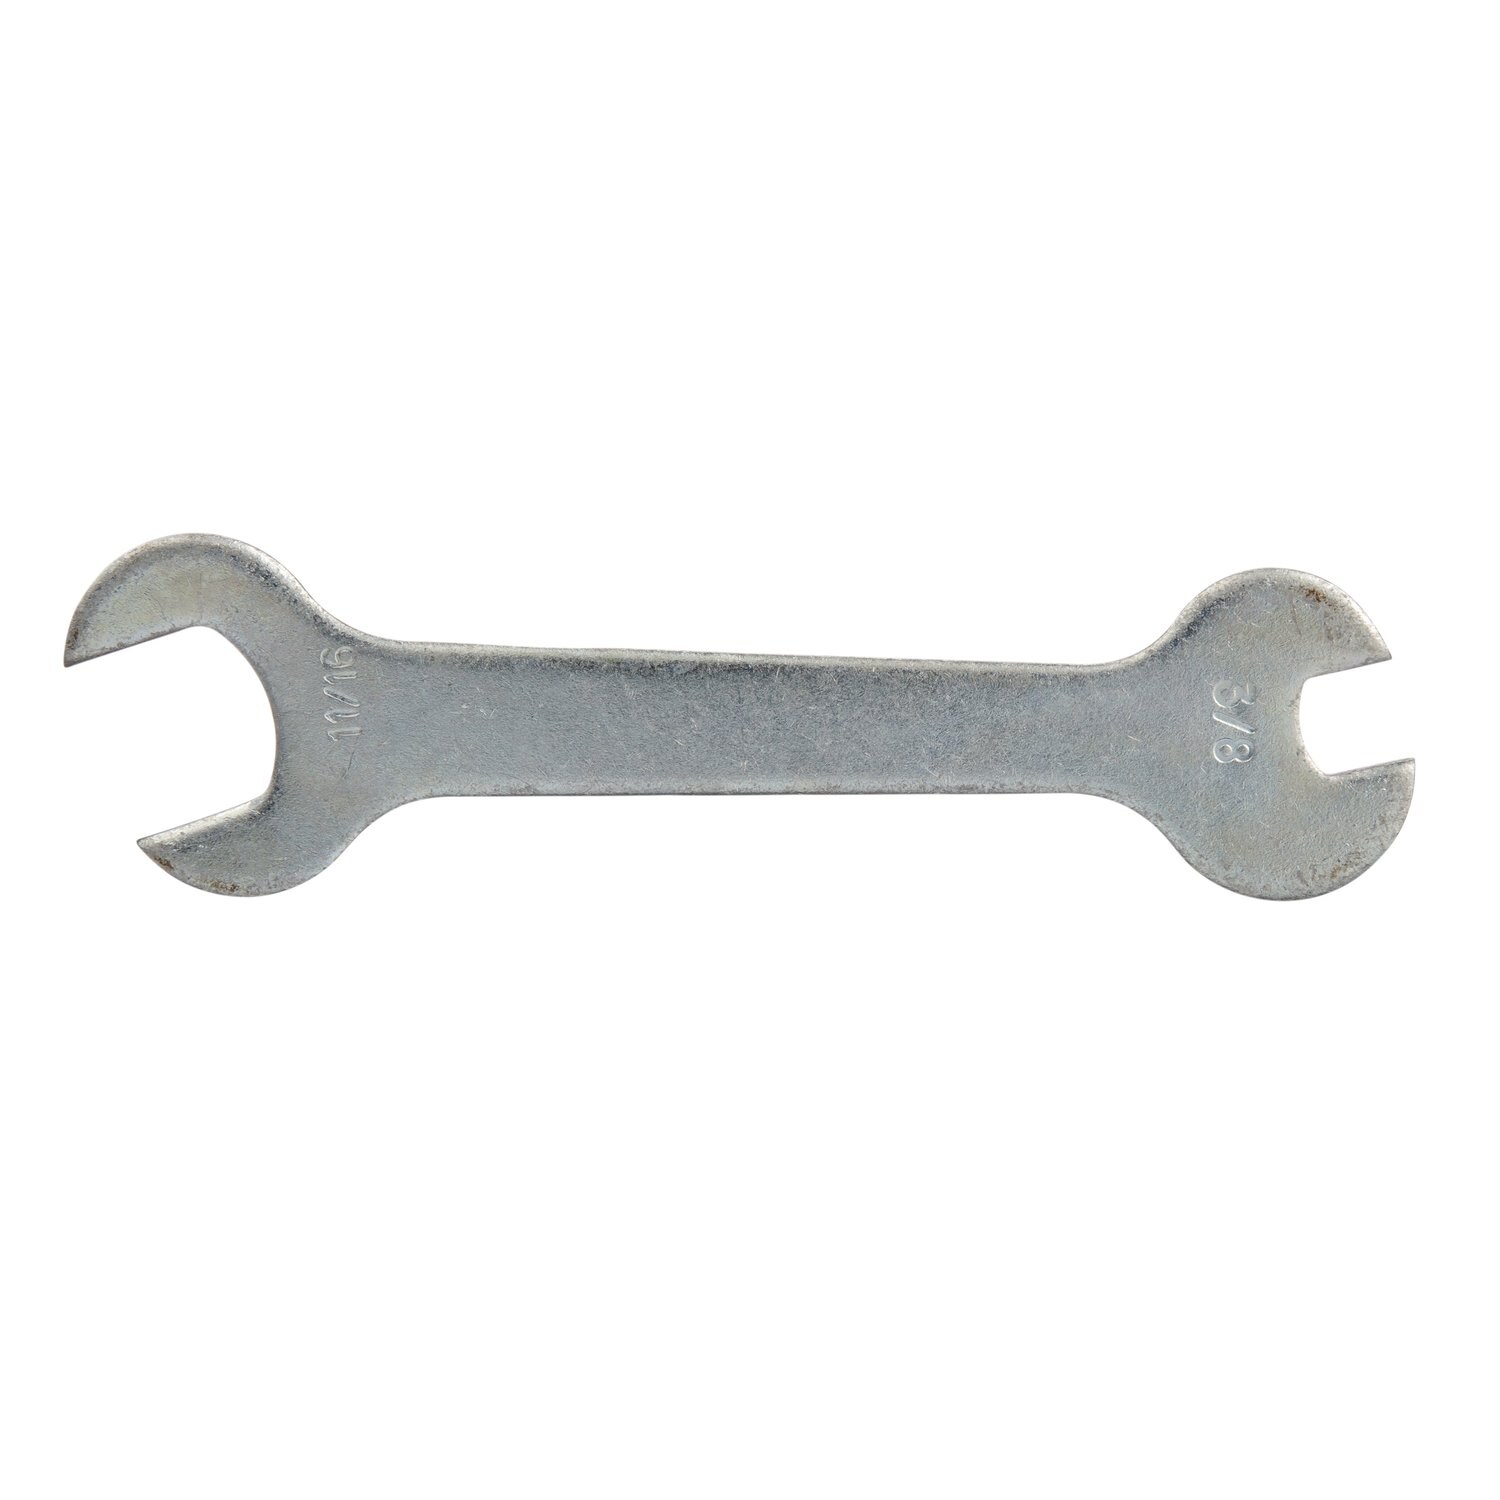 7010327540 - 3M Wrench 3/8 x 11/16 87125